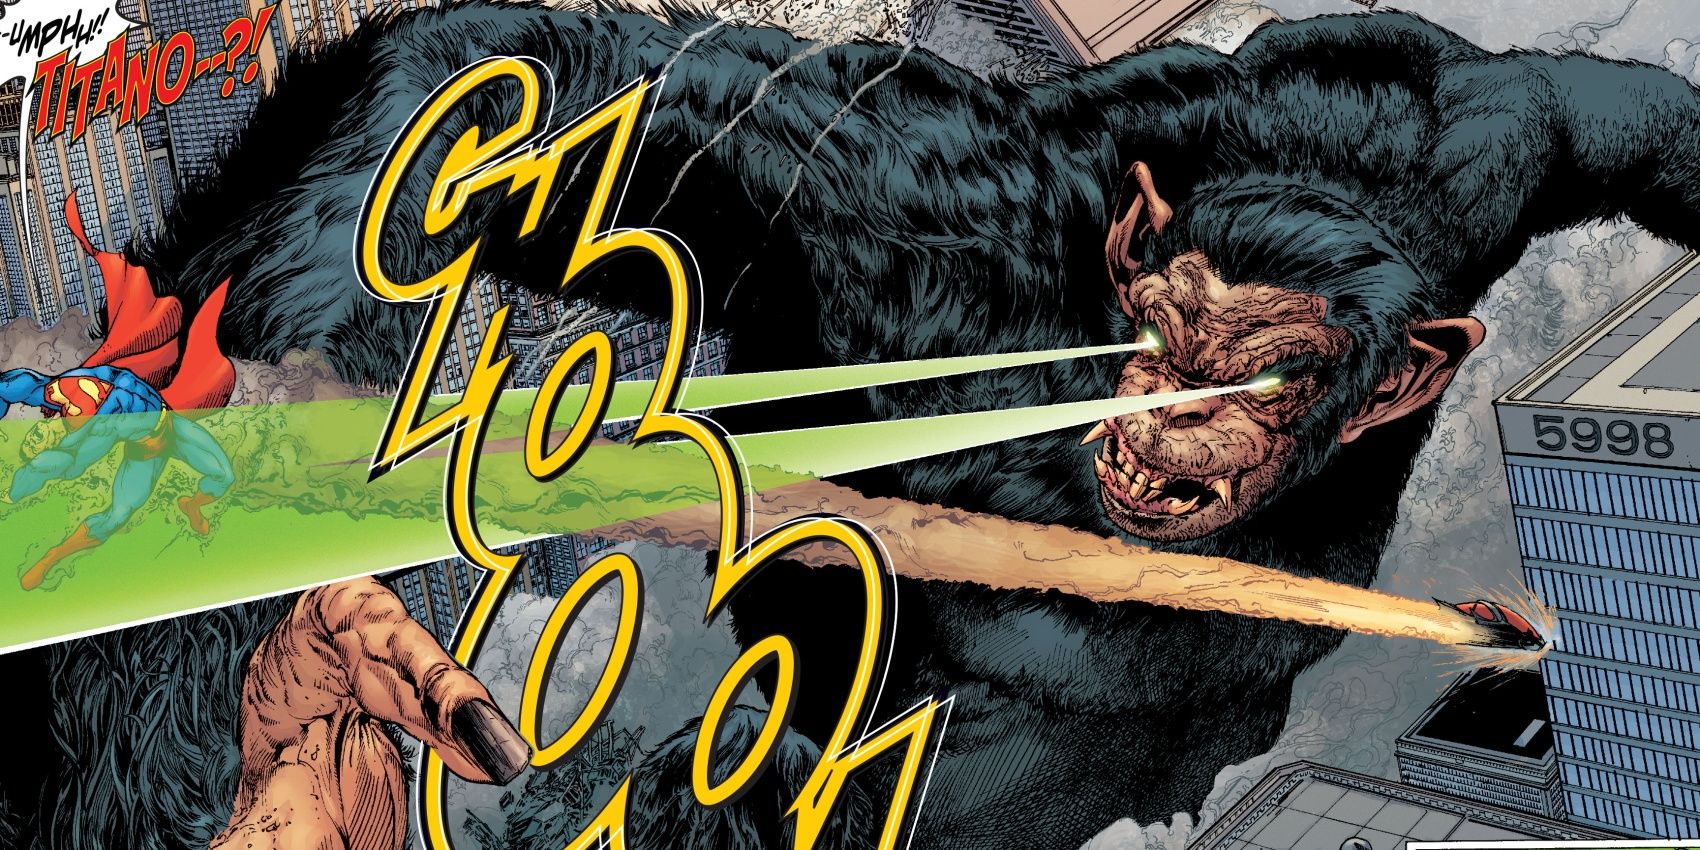 Titano shoots lasers from his eyes at Superman in DC Comics